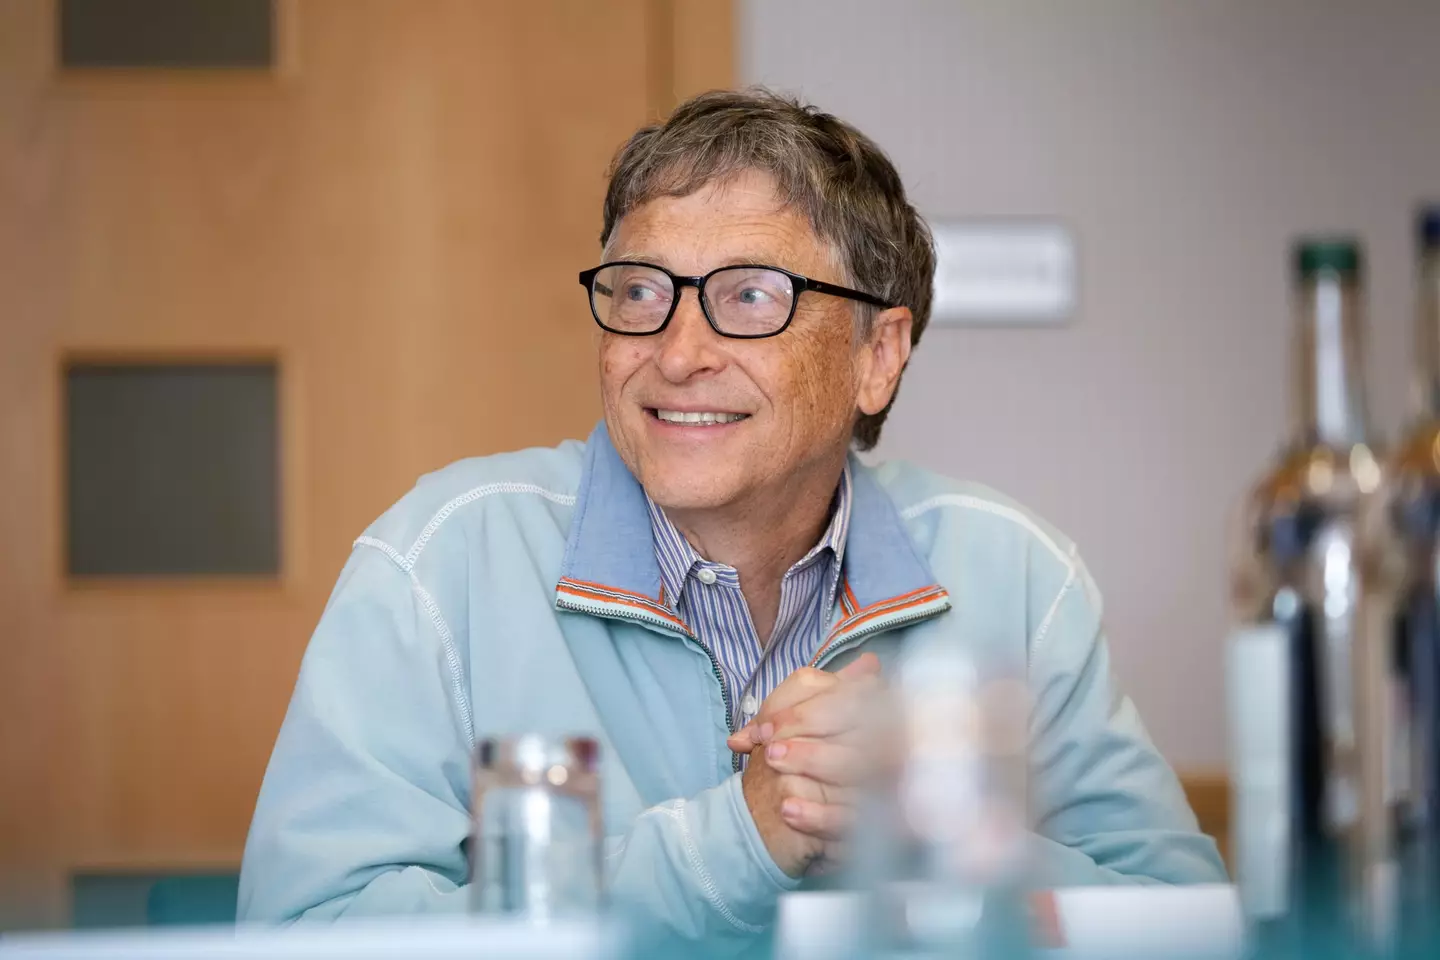 Gates founded Microsoft in 1975.